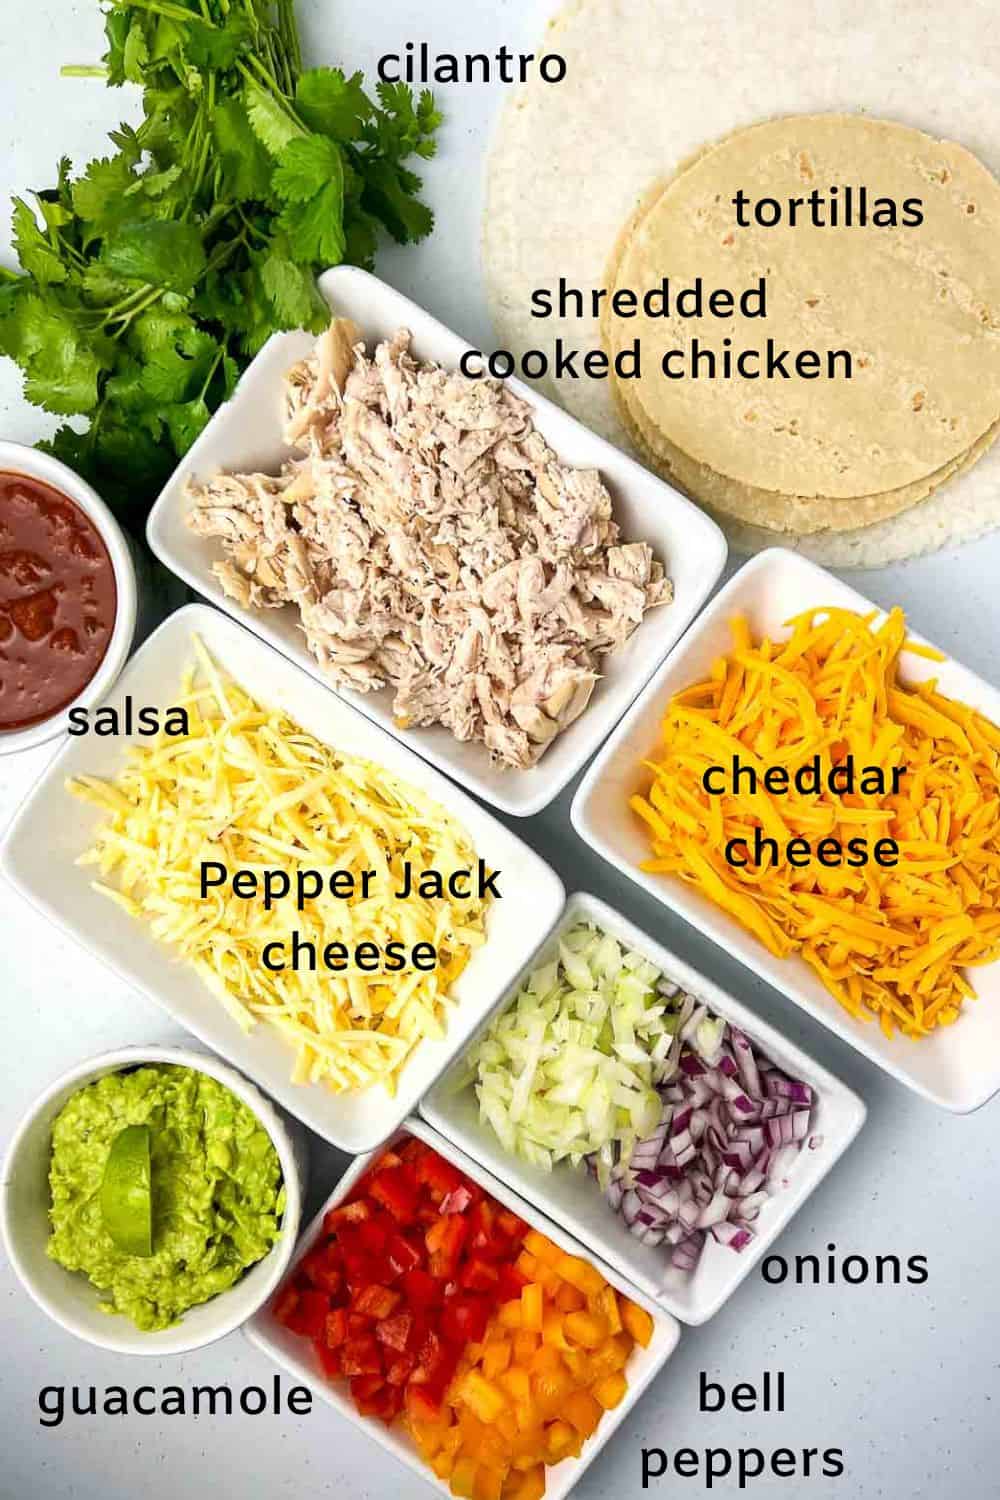 Ingredients with labels for blooming quesadilla platter appetizer.